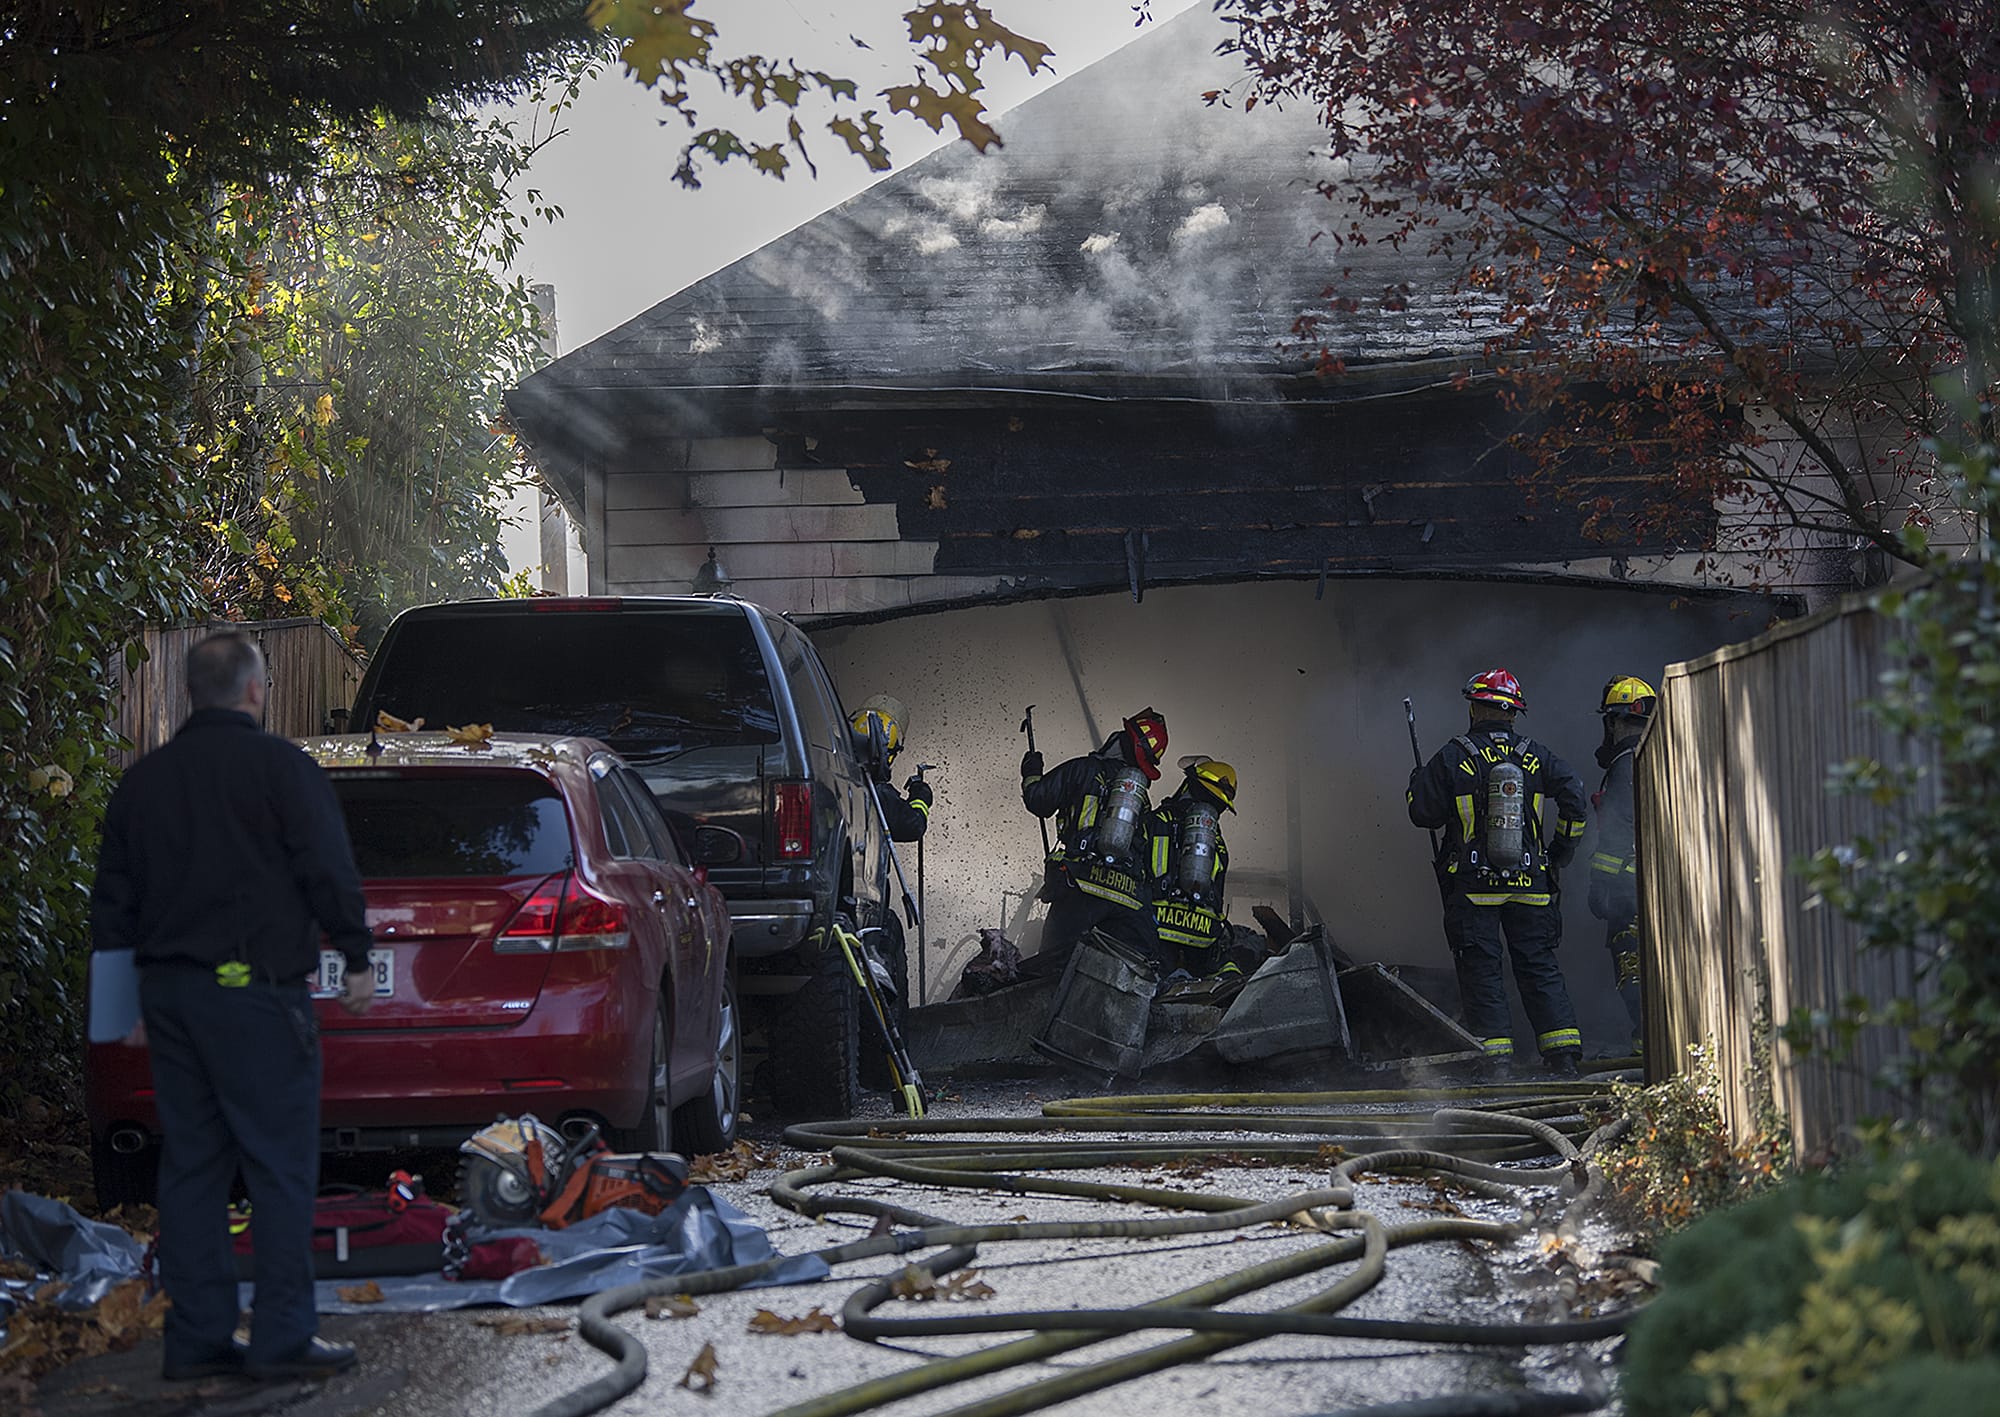 Firefighters battle a blaze at 3711 Northeast 100th Circle south of Salmon Creek on Monday morning, Nov. 12, 2018. No injuries were reported in the fire.